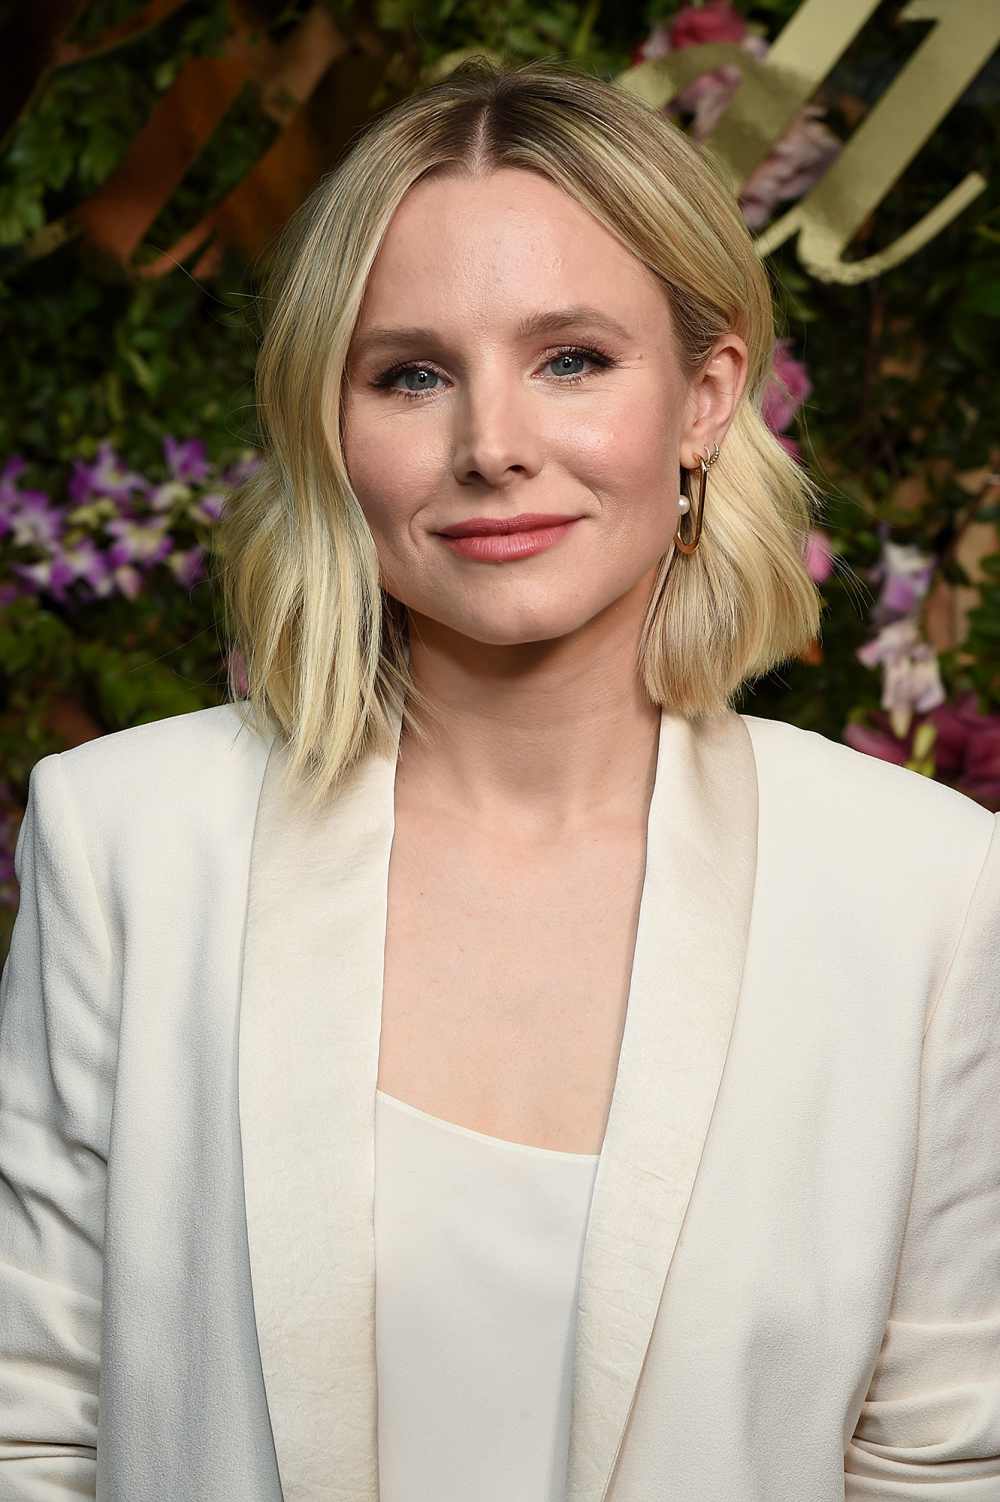 Kristen Bell's ‘Game of Thrones’ Viewing Party Shake Shack